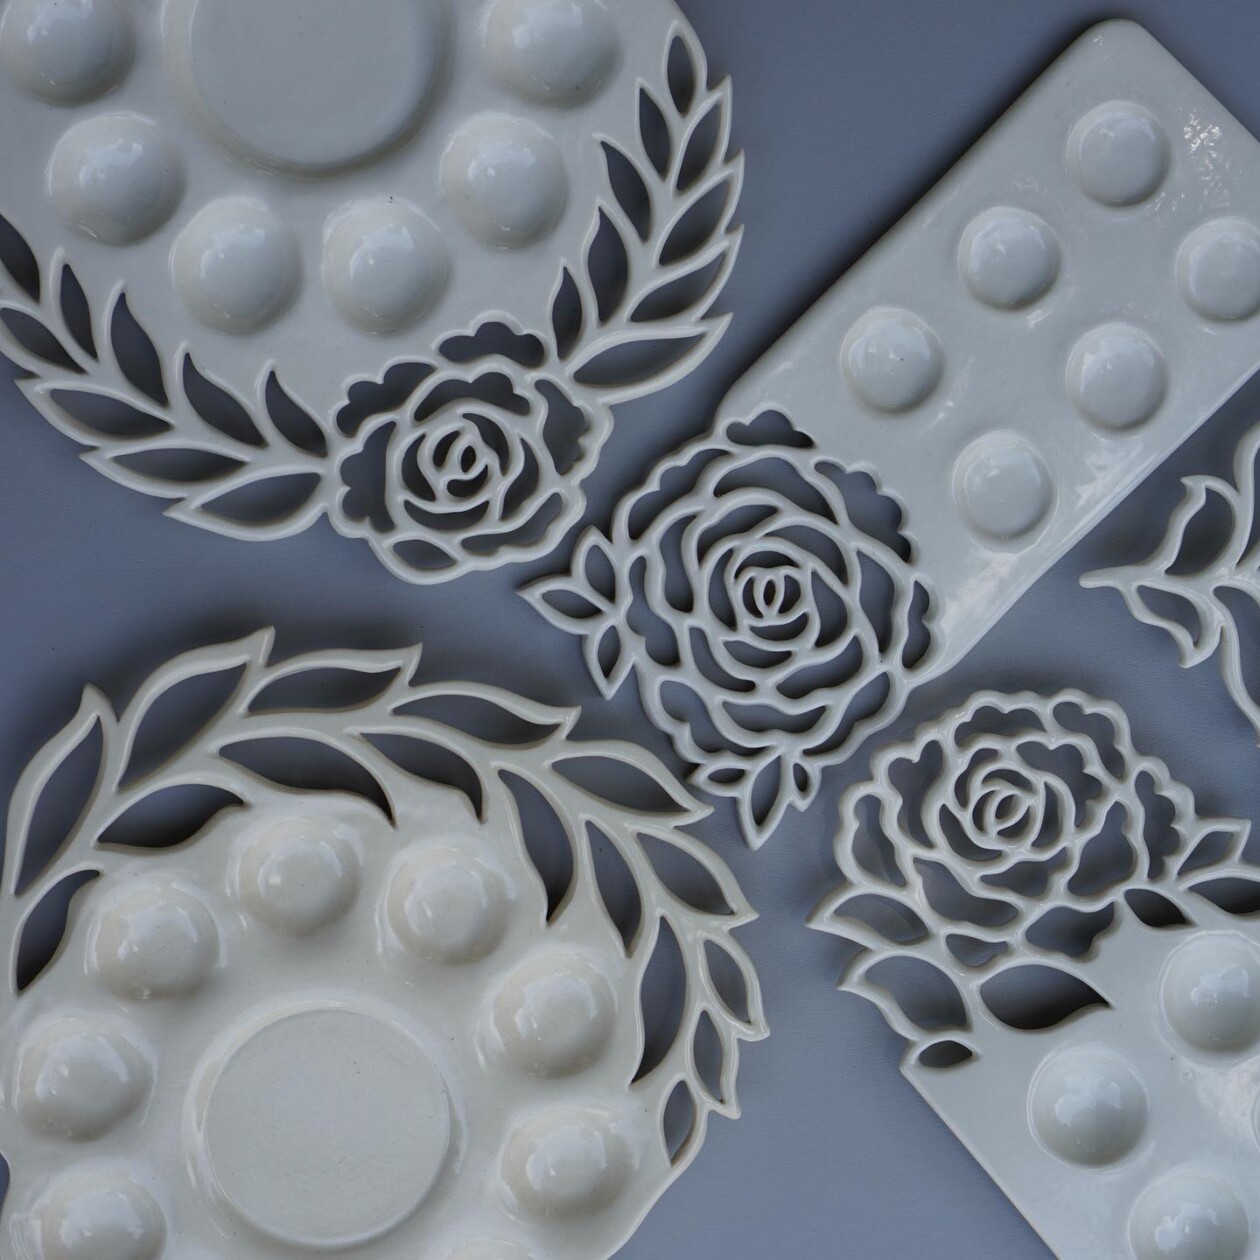 Detailed Hand Carved Porcelain Pieces By Annie Quigley (5)